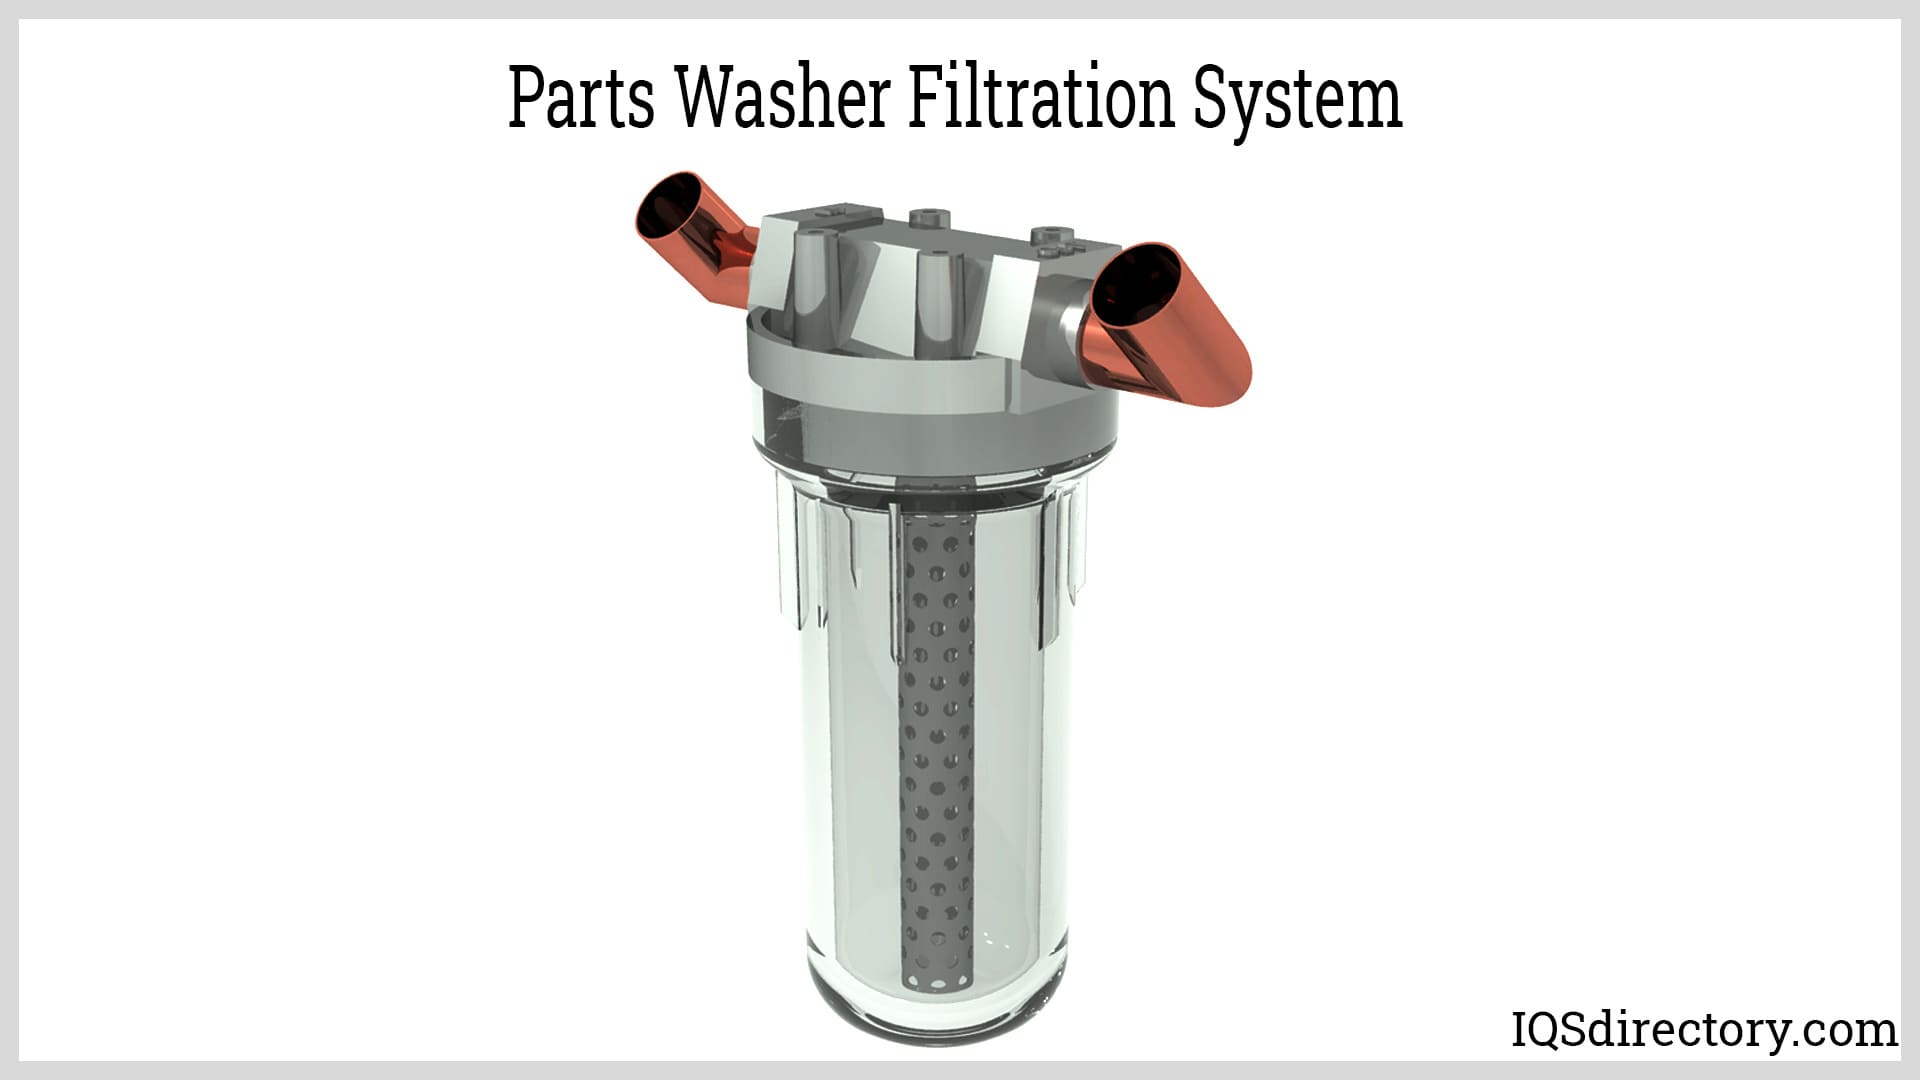 Parts Washer Filtration System